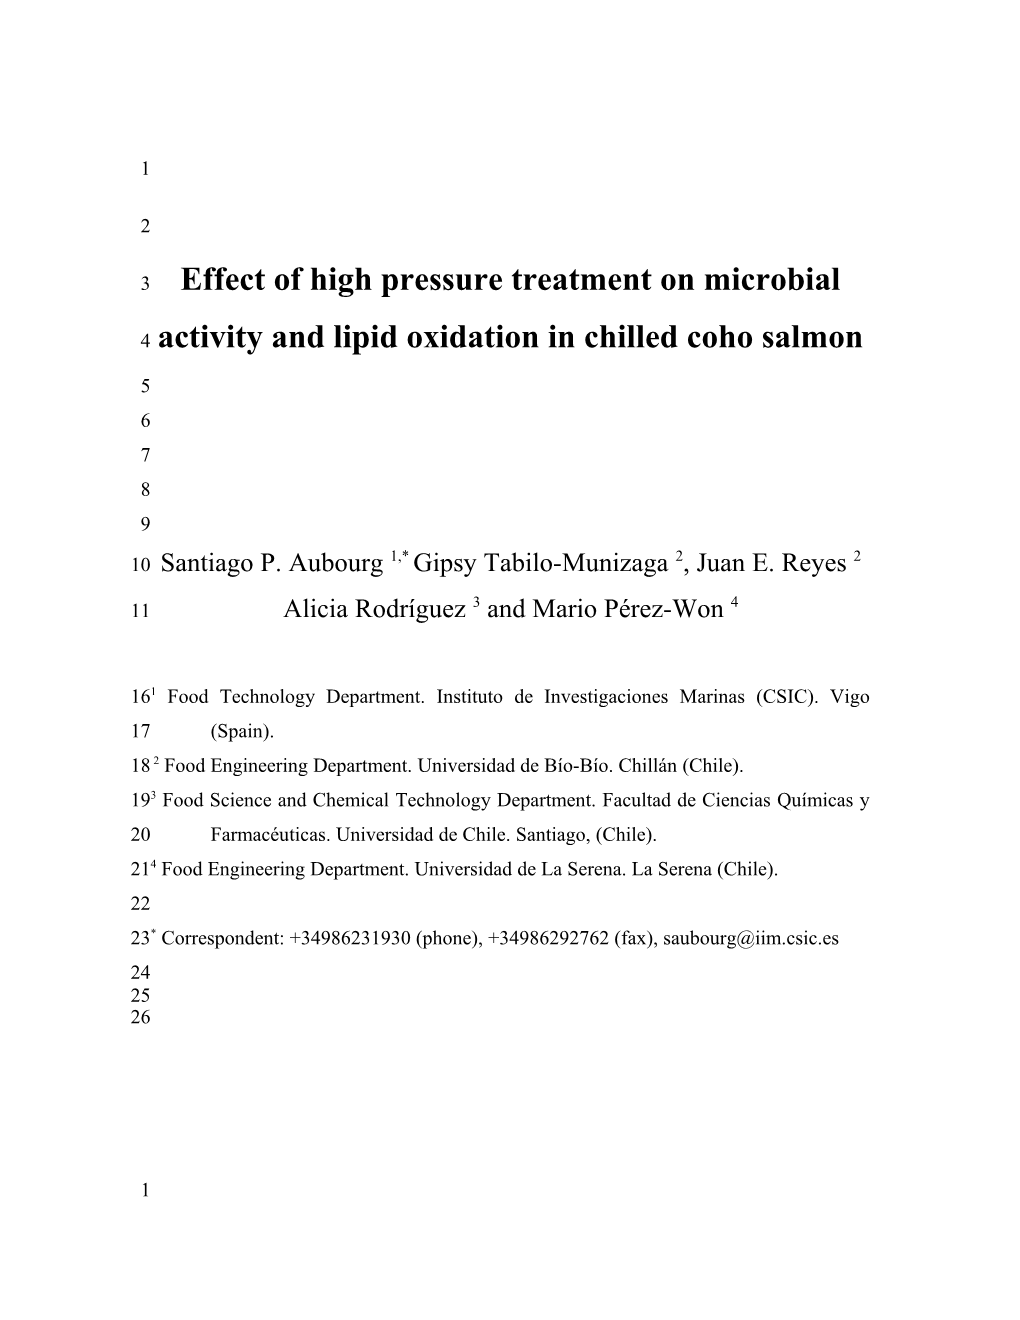 Effect of High Pressure Treatment on Microbial Activity and Lipid Oxidation in Chilled